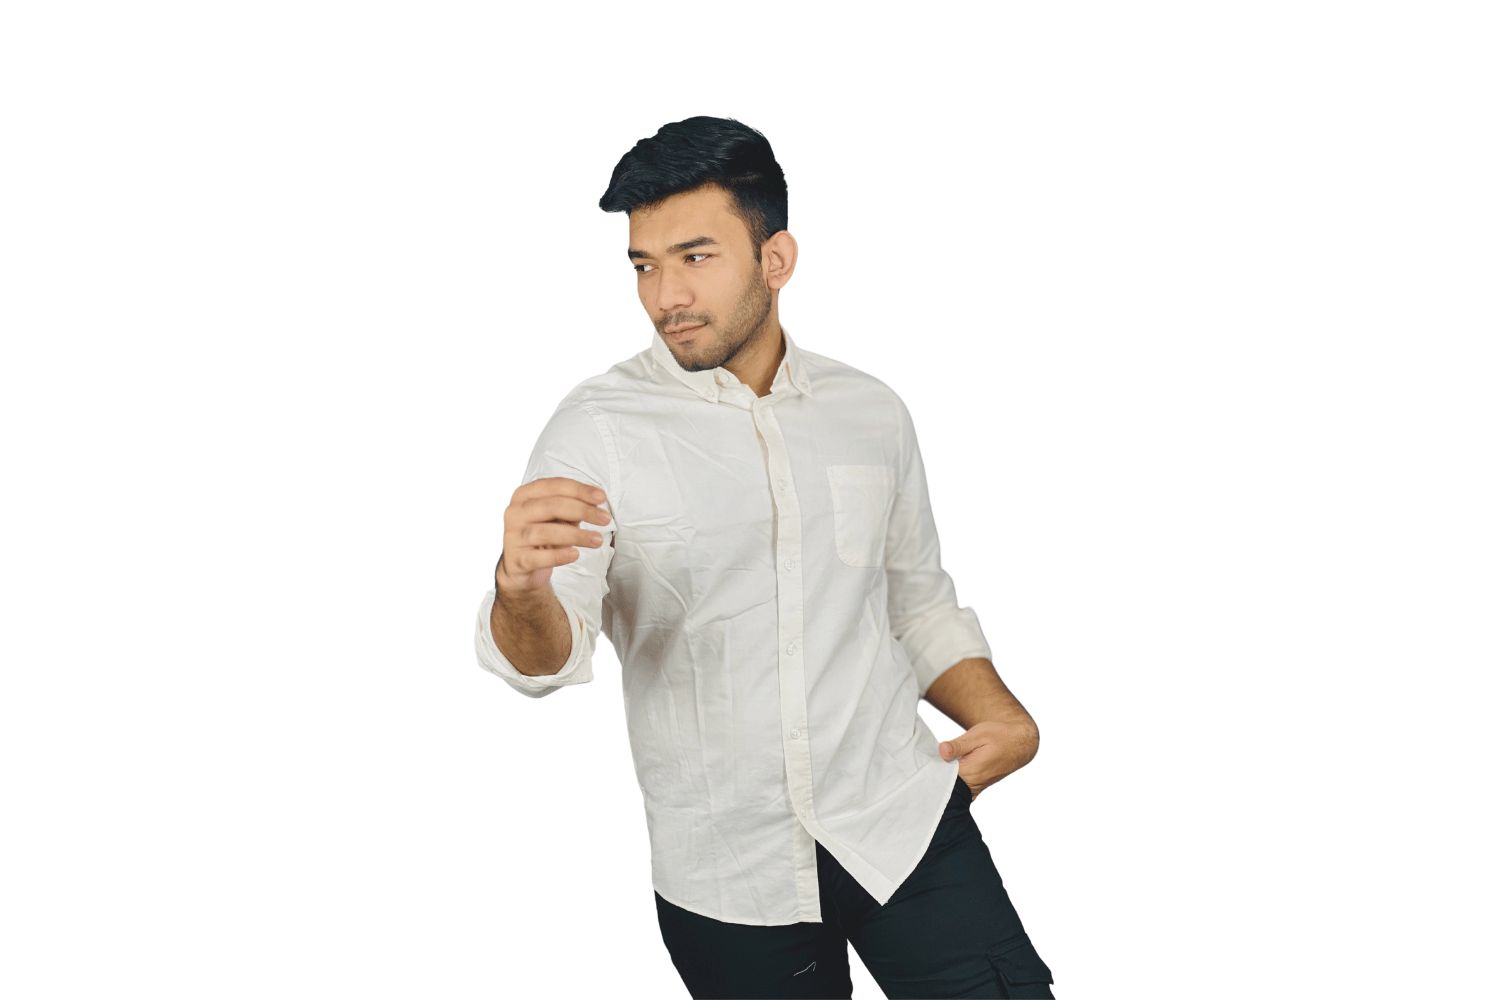 Introducing the Full Sleeve Shirt - your ultimate summer companion in crisp white!